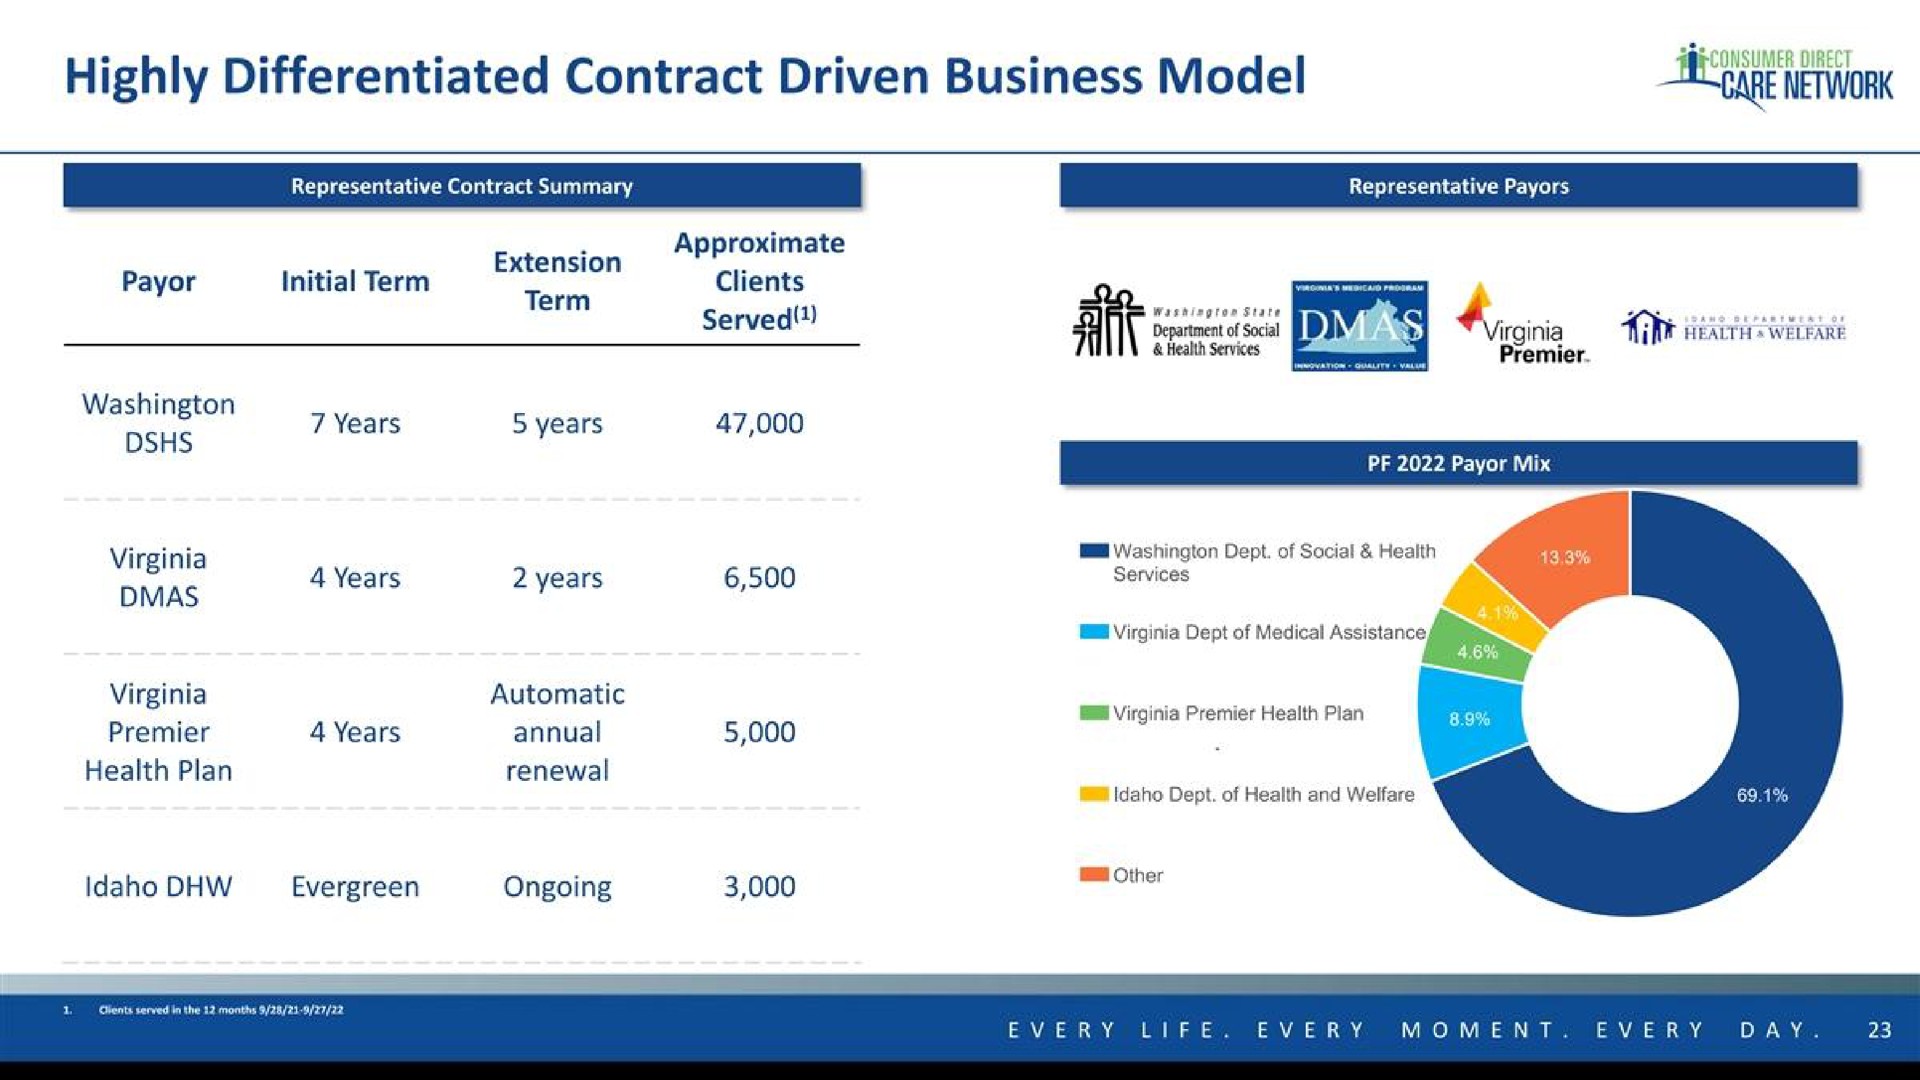 highly differentiated contract driven business model ase network | Consumer Direct Care Network